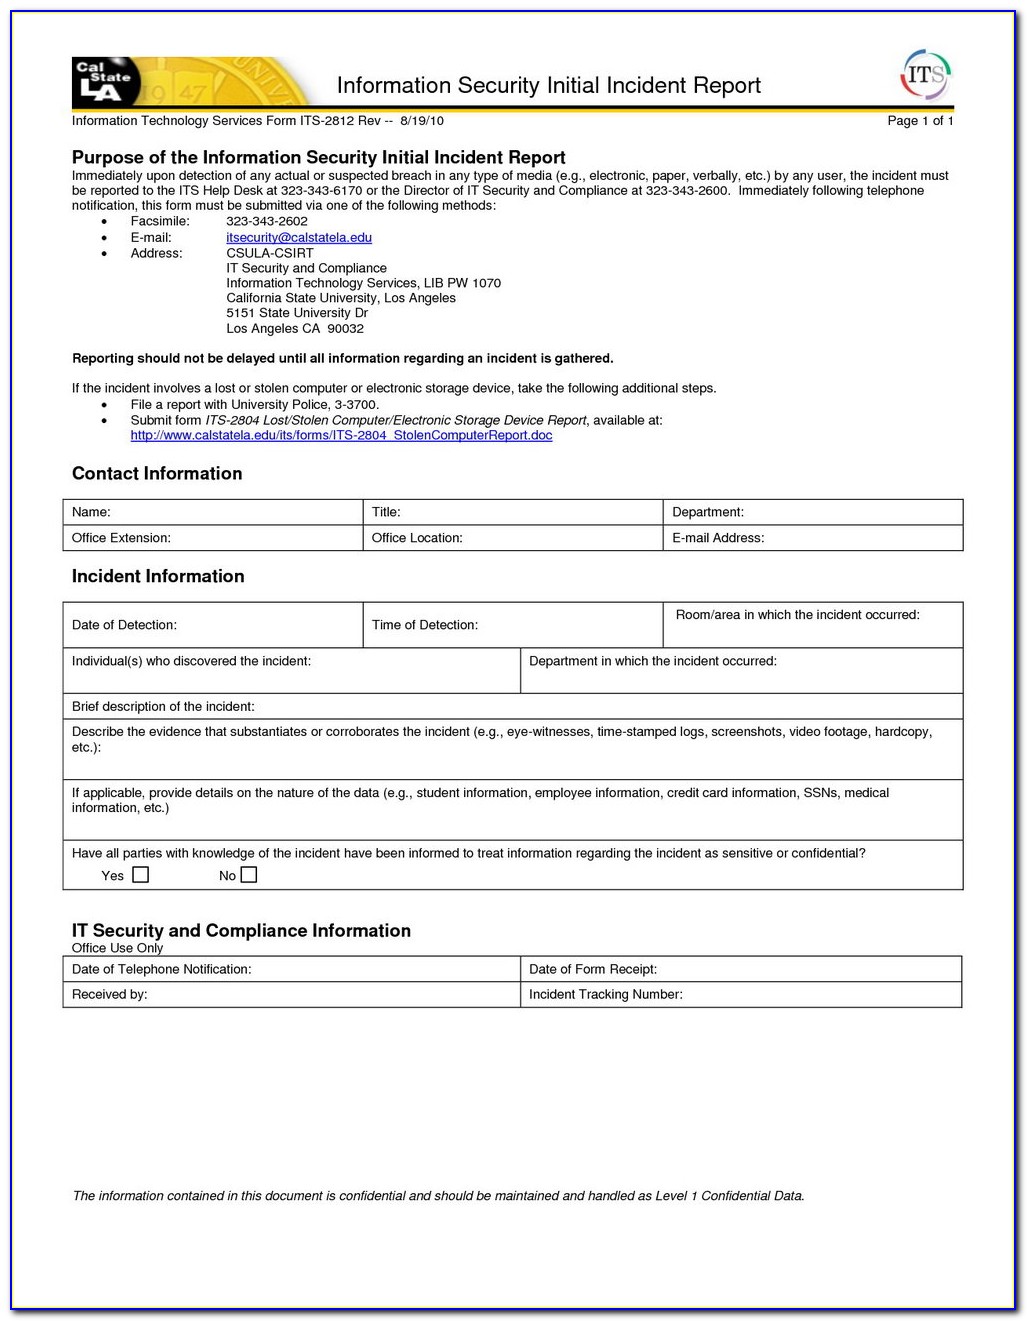 Security Incident Report Template